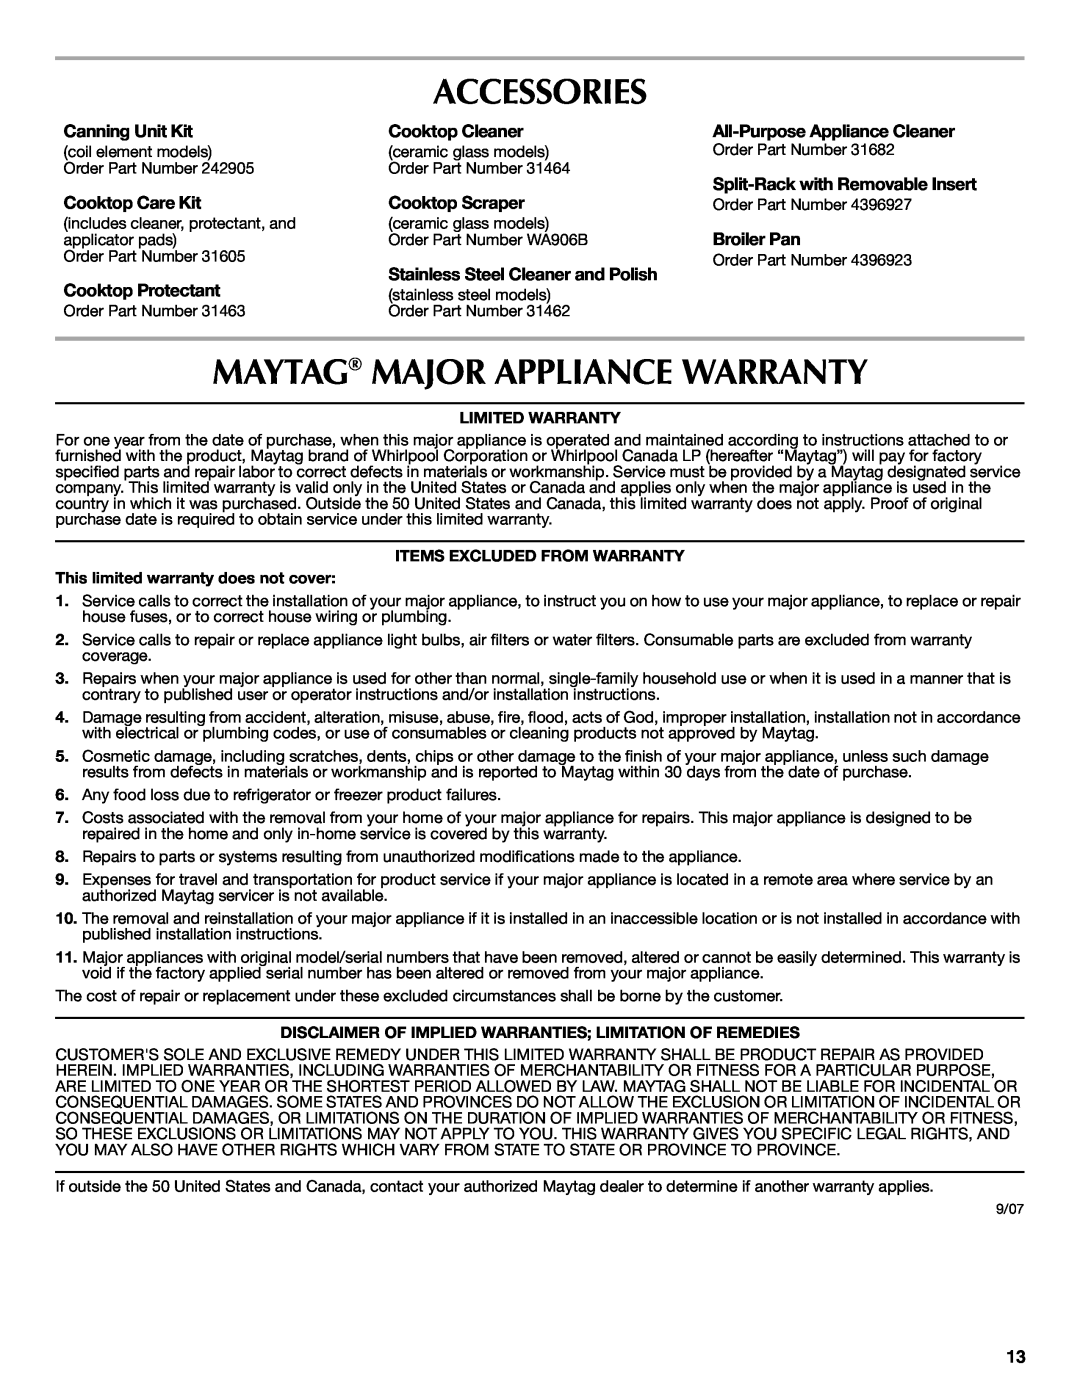 Maytag W10239458A Accessories, Maytag Major Appliance Warranty, Canning Unit Kit, Cooktop Cleaner, Cooktop Care Kit 